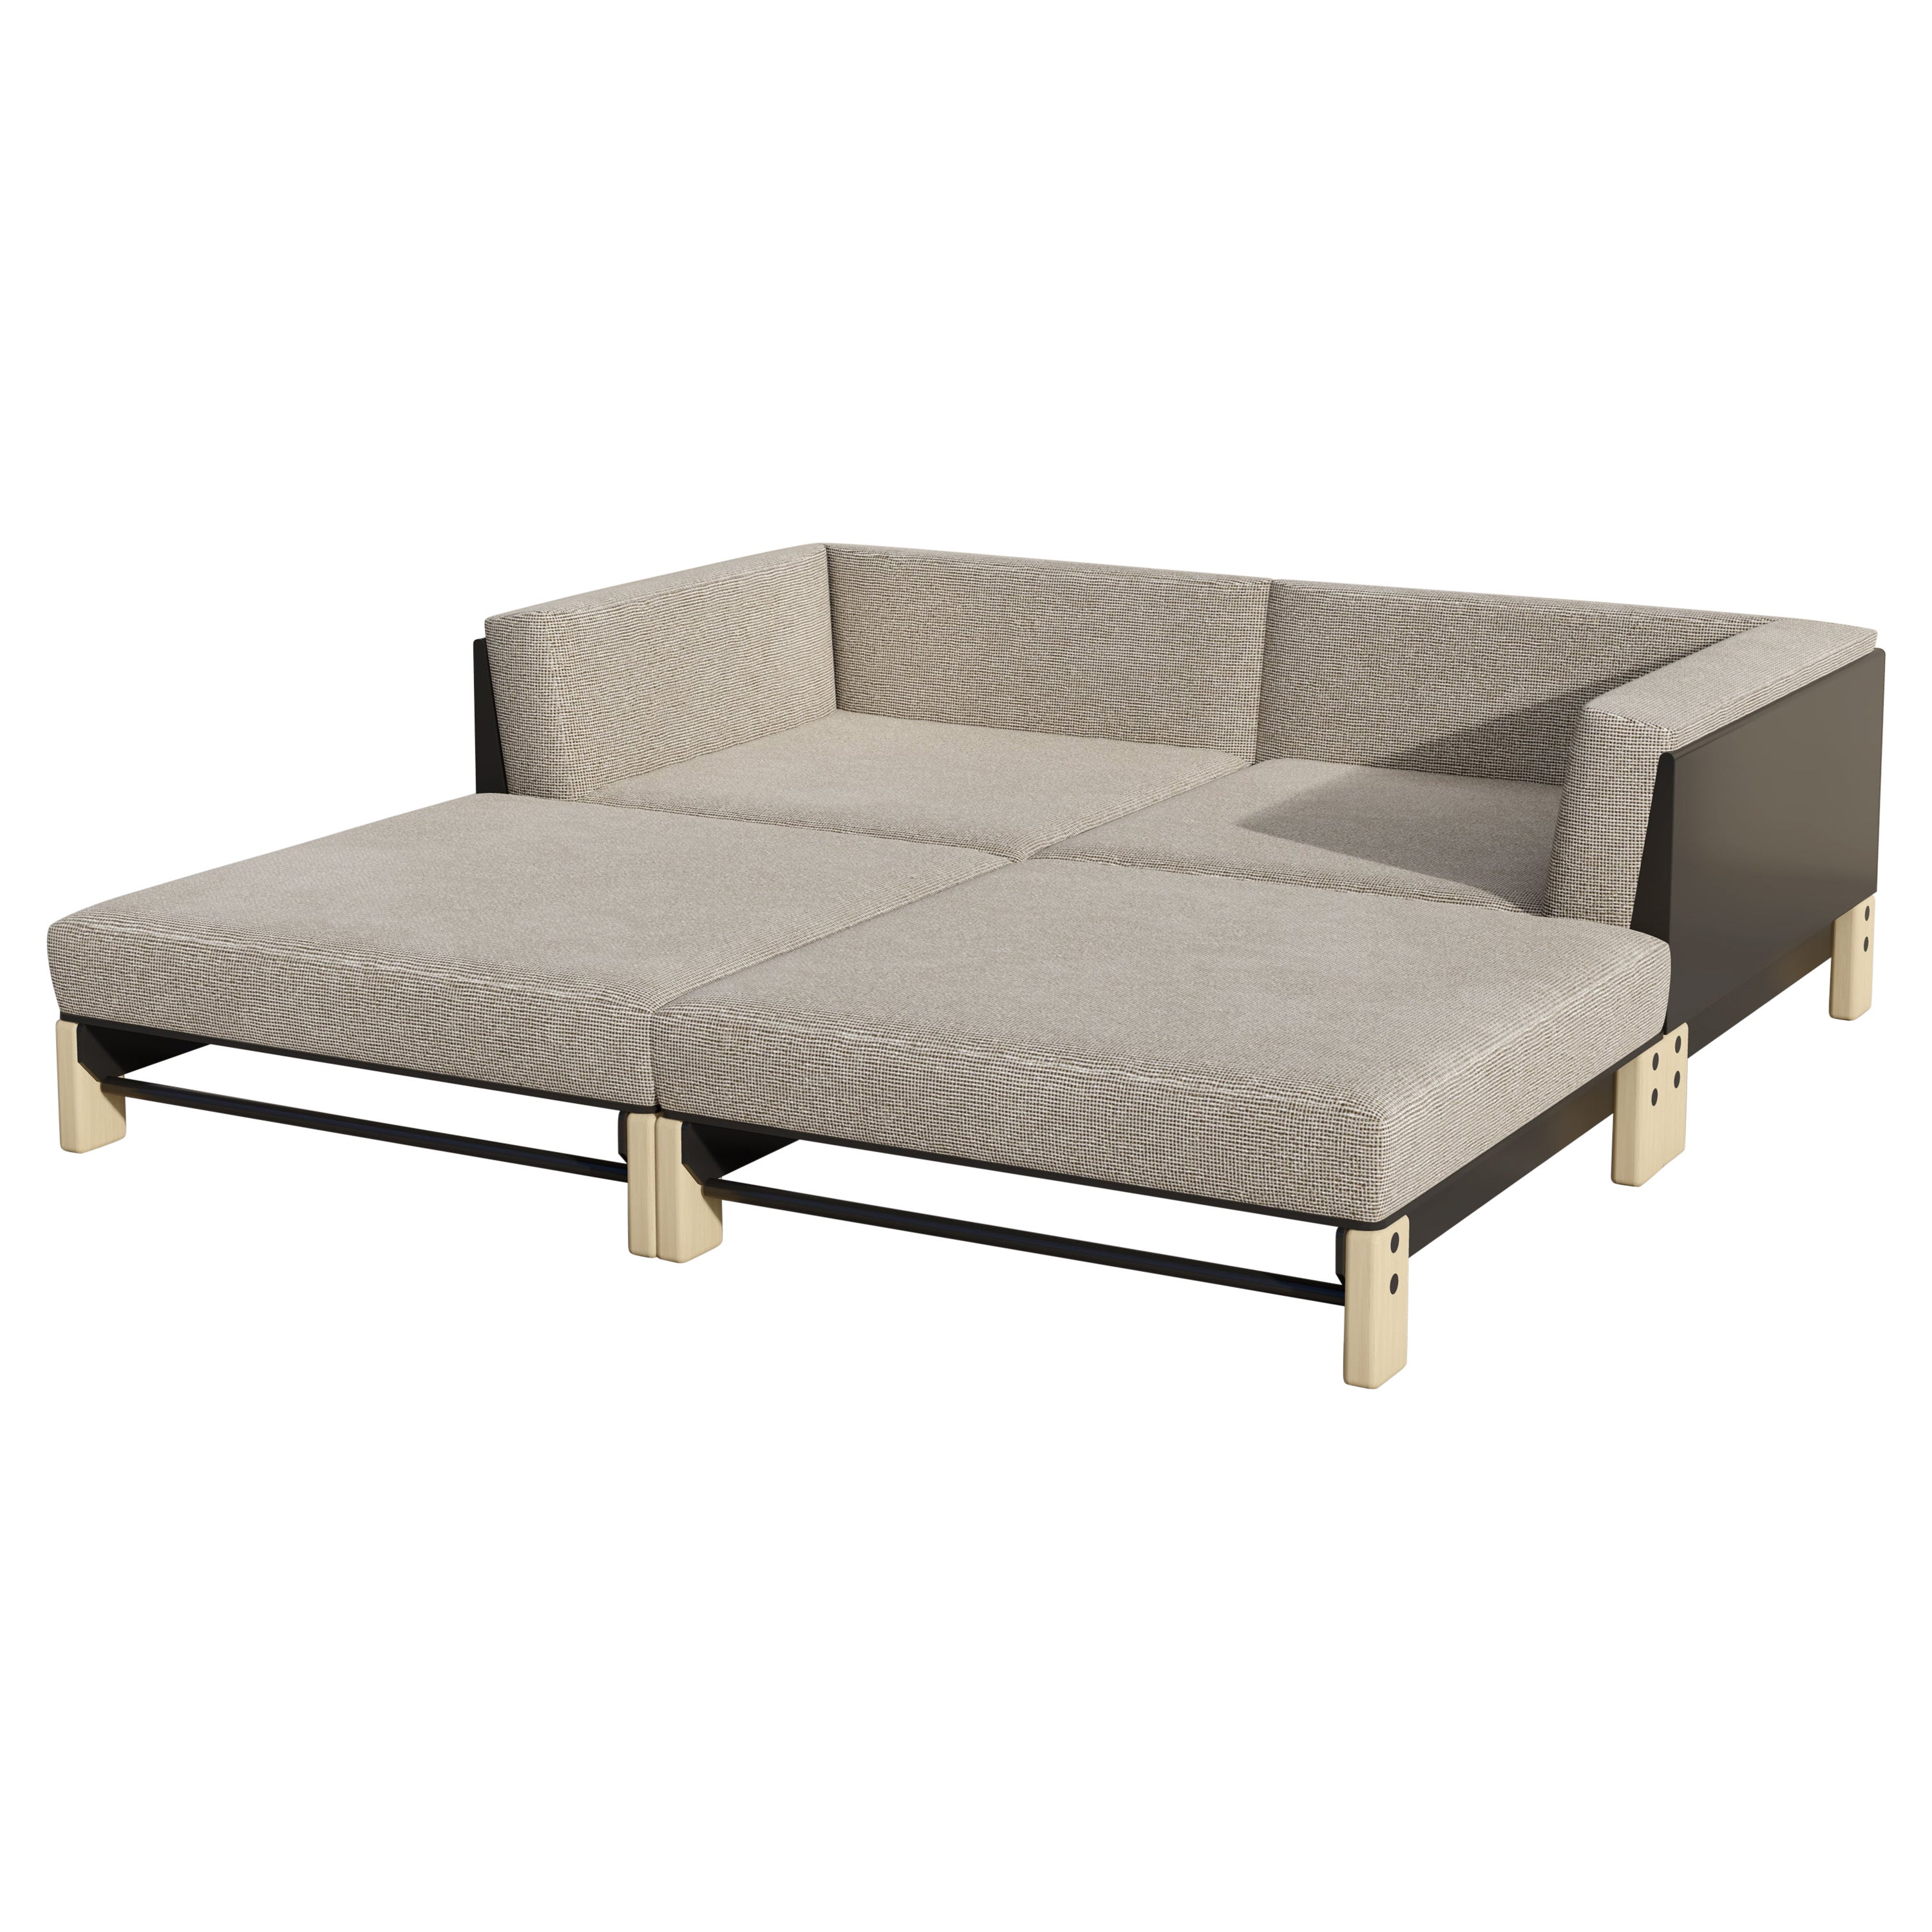 Outdoor Lounge Sectional 0:1, Chaise Day Bed For Sale